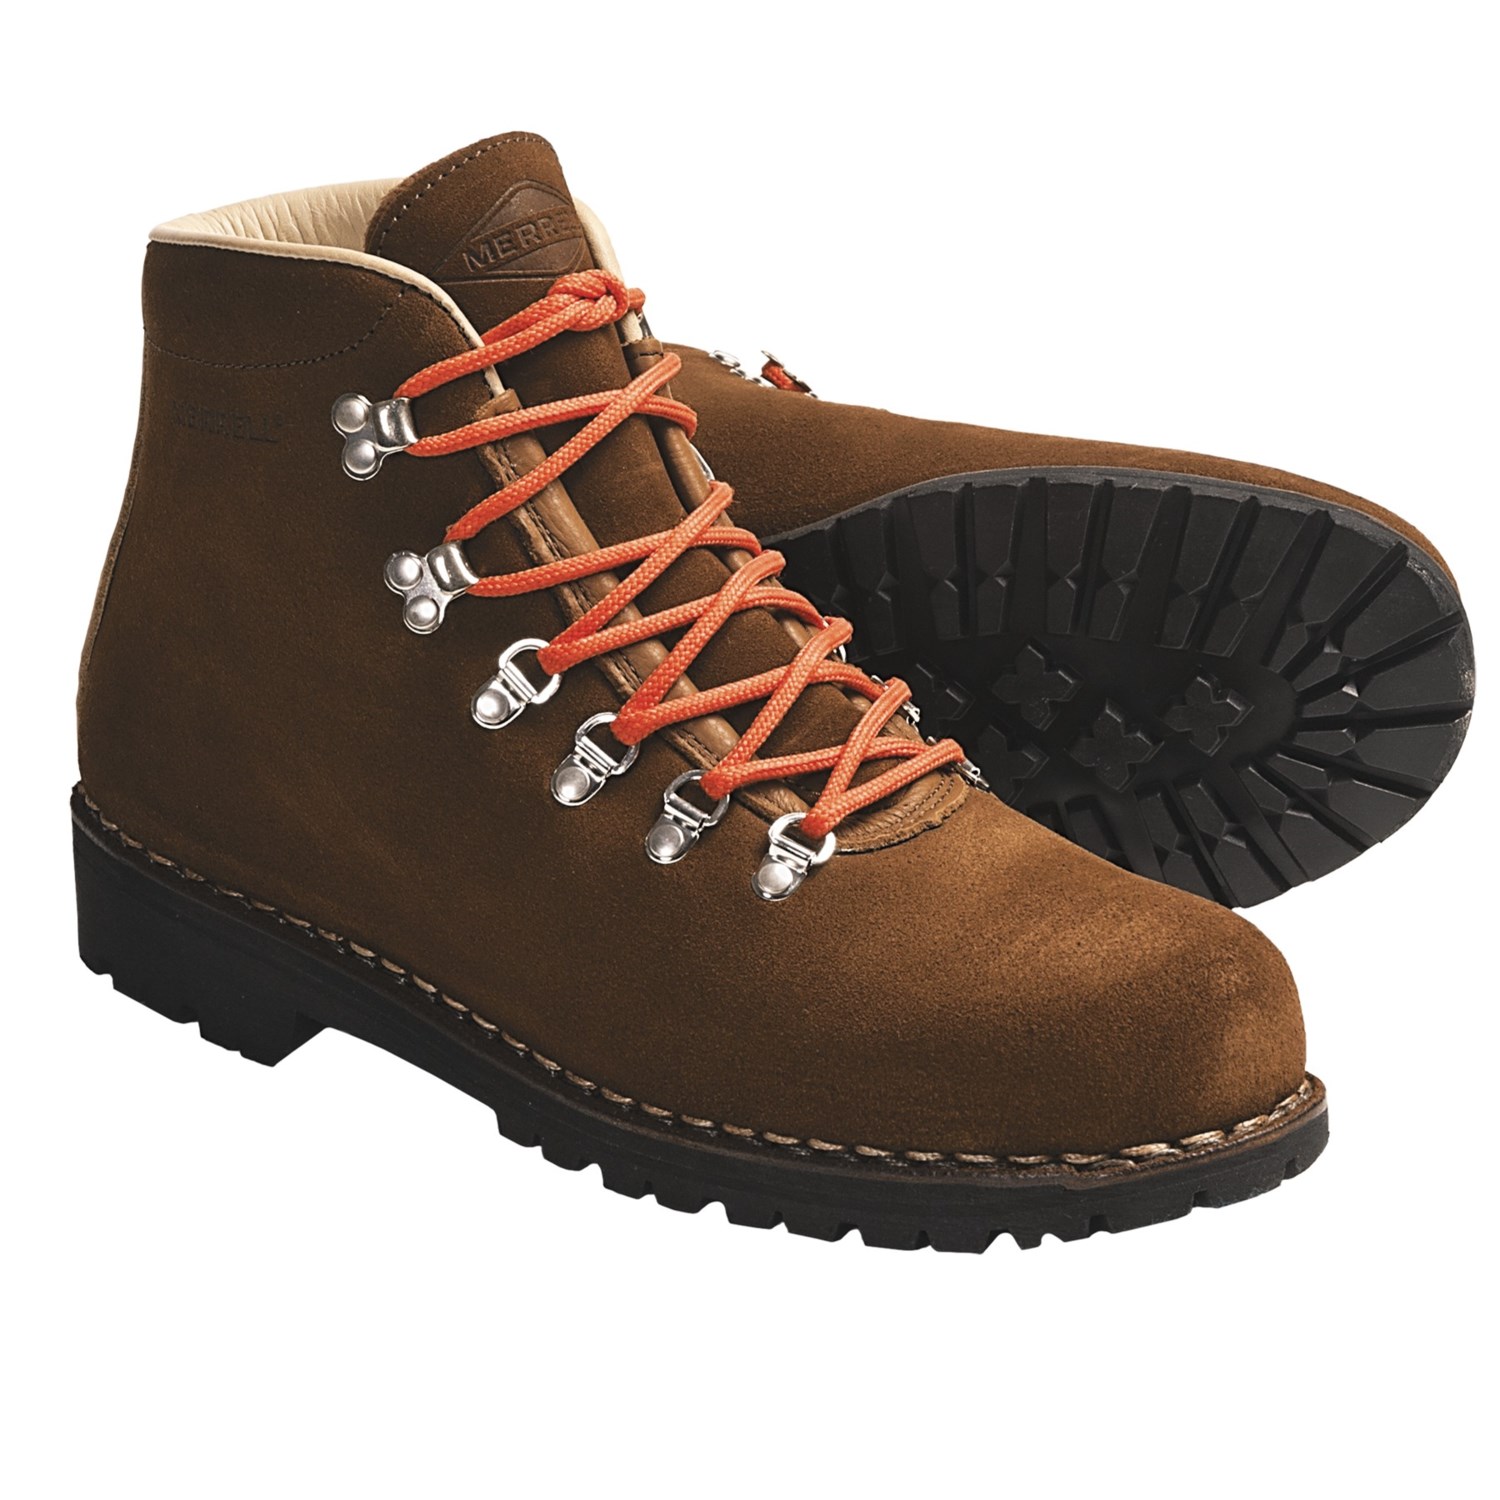 Merrell Wilderness Hiking Boots (For Men) 5048D - Save 28%